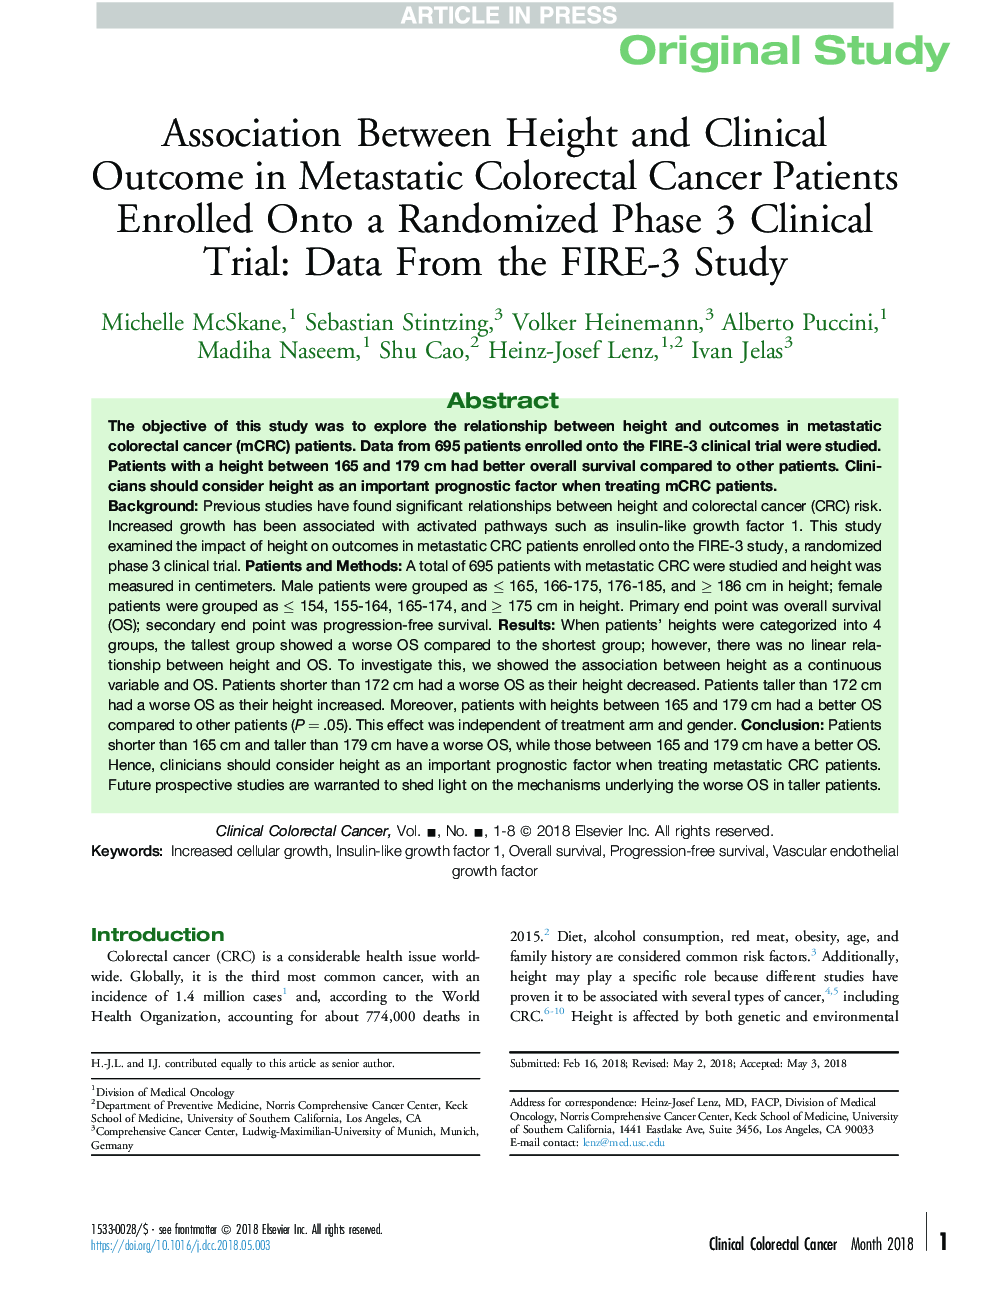 Association Between Height and Clinical Outcome in Metastatic Colorectal Cancer Patients Enrolled Onto a Randomized Phase 3 Clinical Trial: Data From the FIRE-3 Study